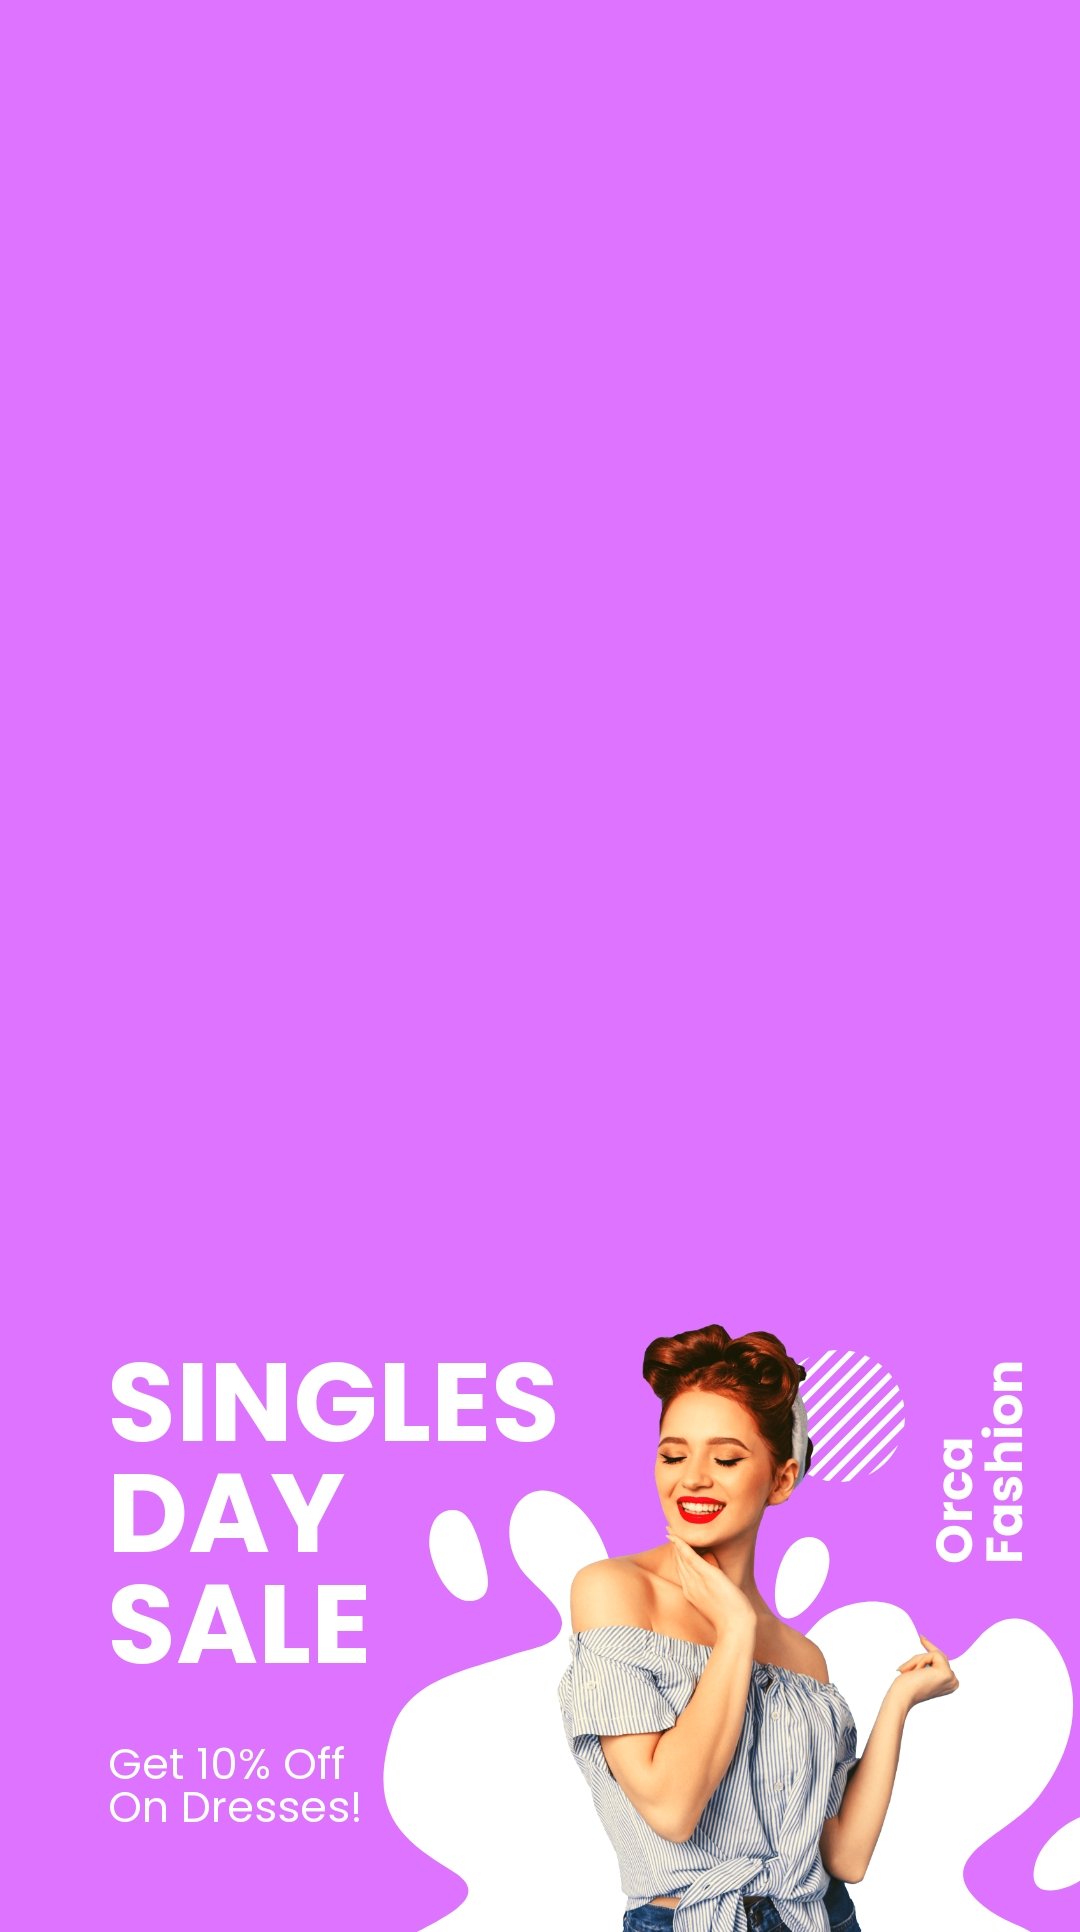 Singles Day Sale Snapchat Geofilter